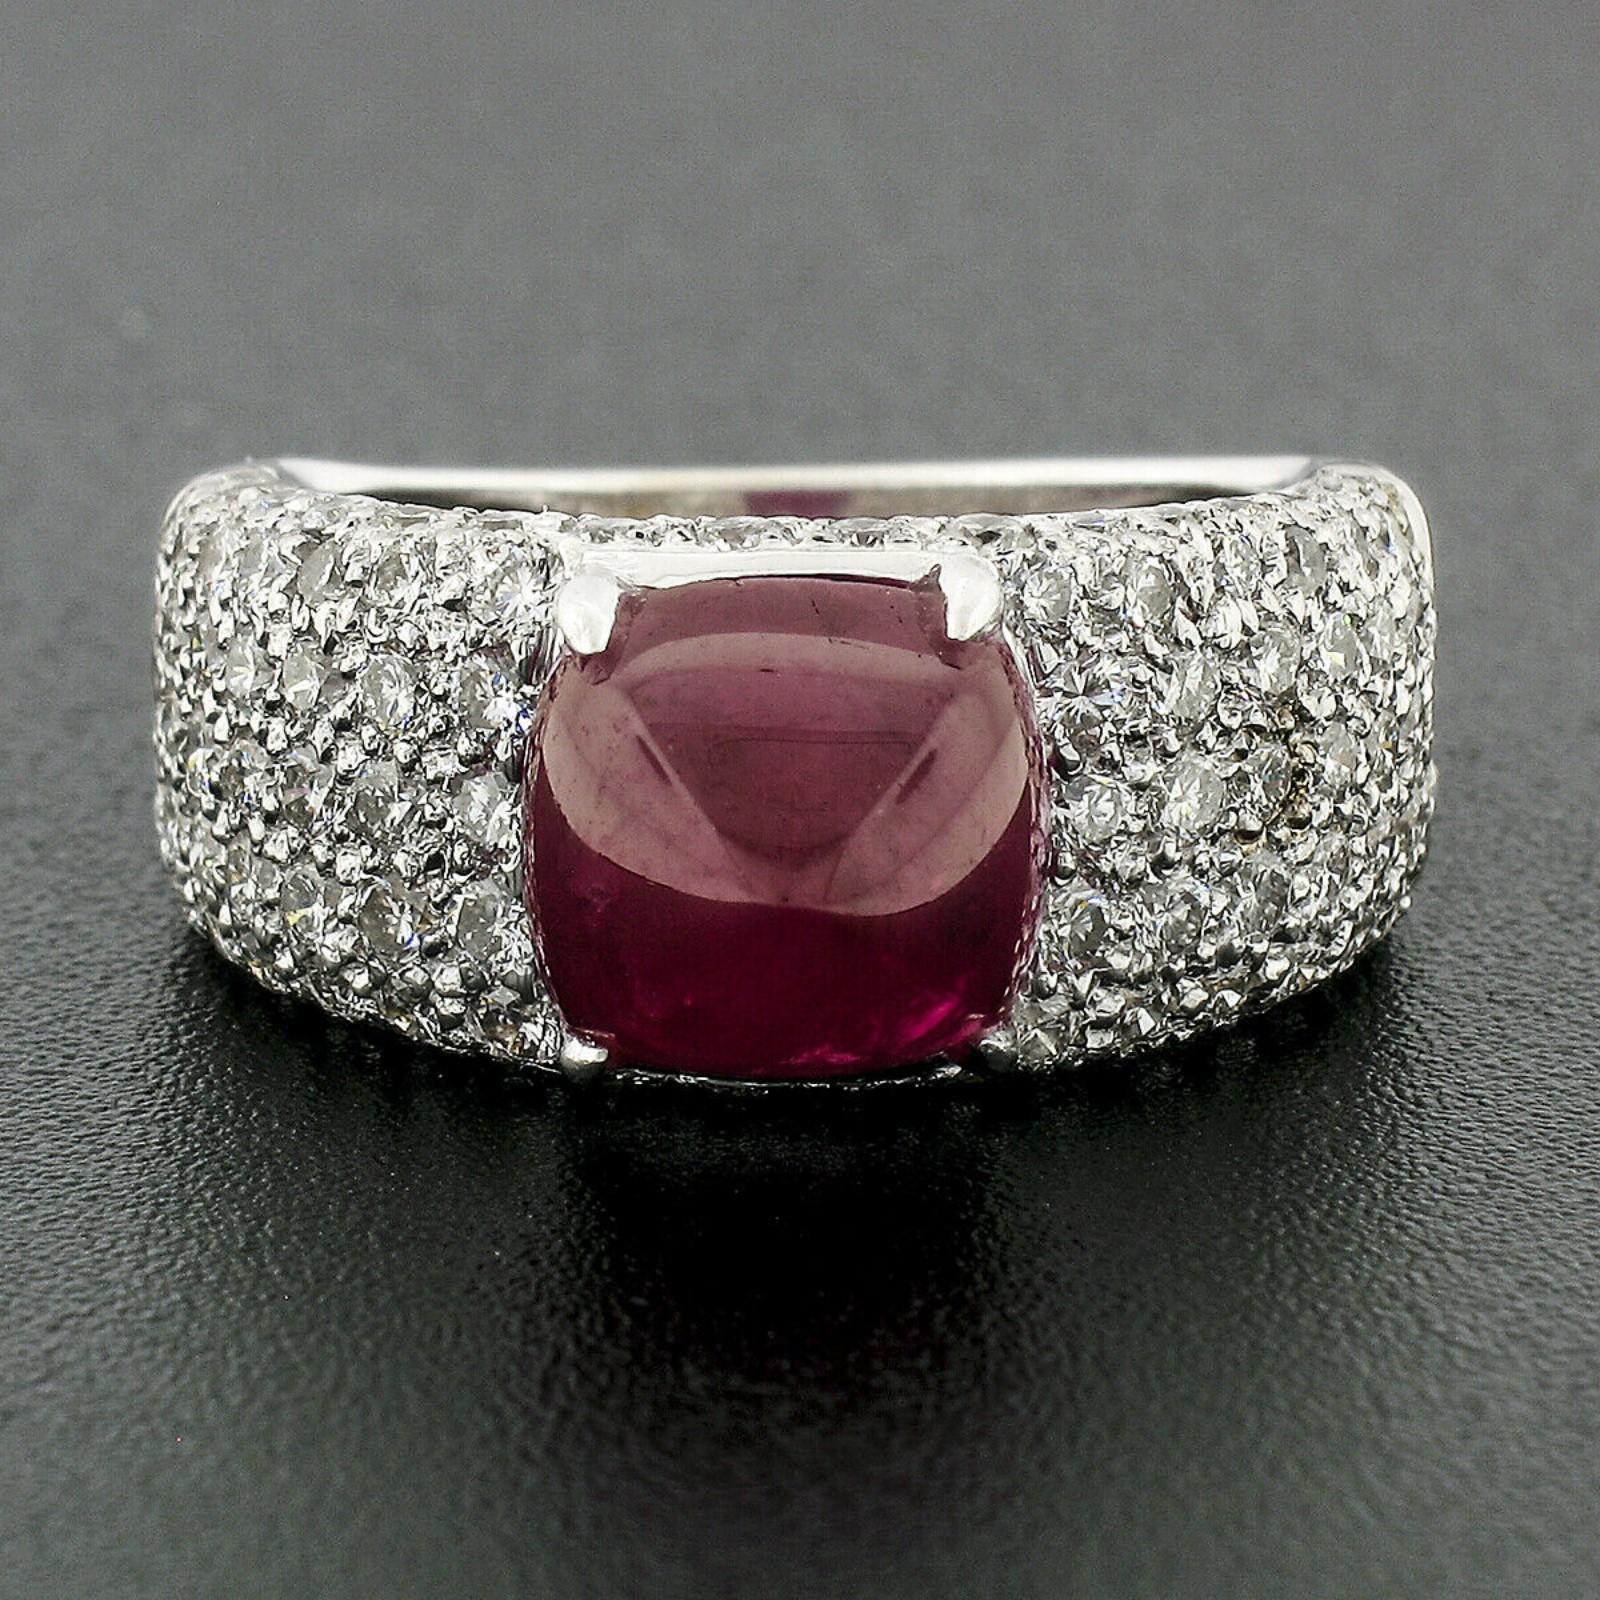 This gorgeous band ring was crafted from solid 18k white gold and features a cushion sugarloaf cut ruby with a magnificently rich wine-red color. The stone weighs exactly 4.97 carats and is certified by AGL as being a naturally mined stone